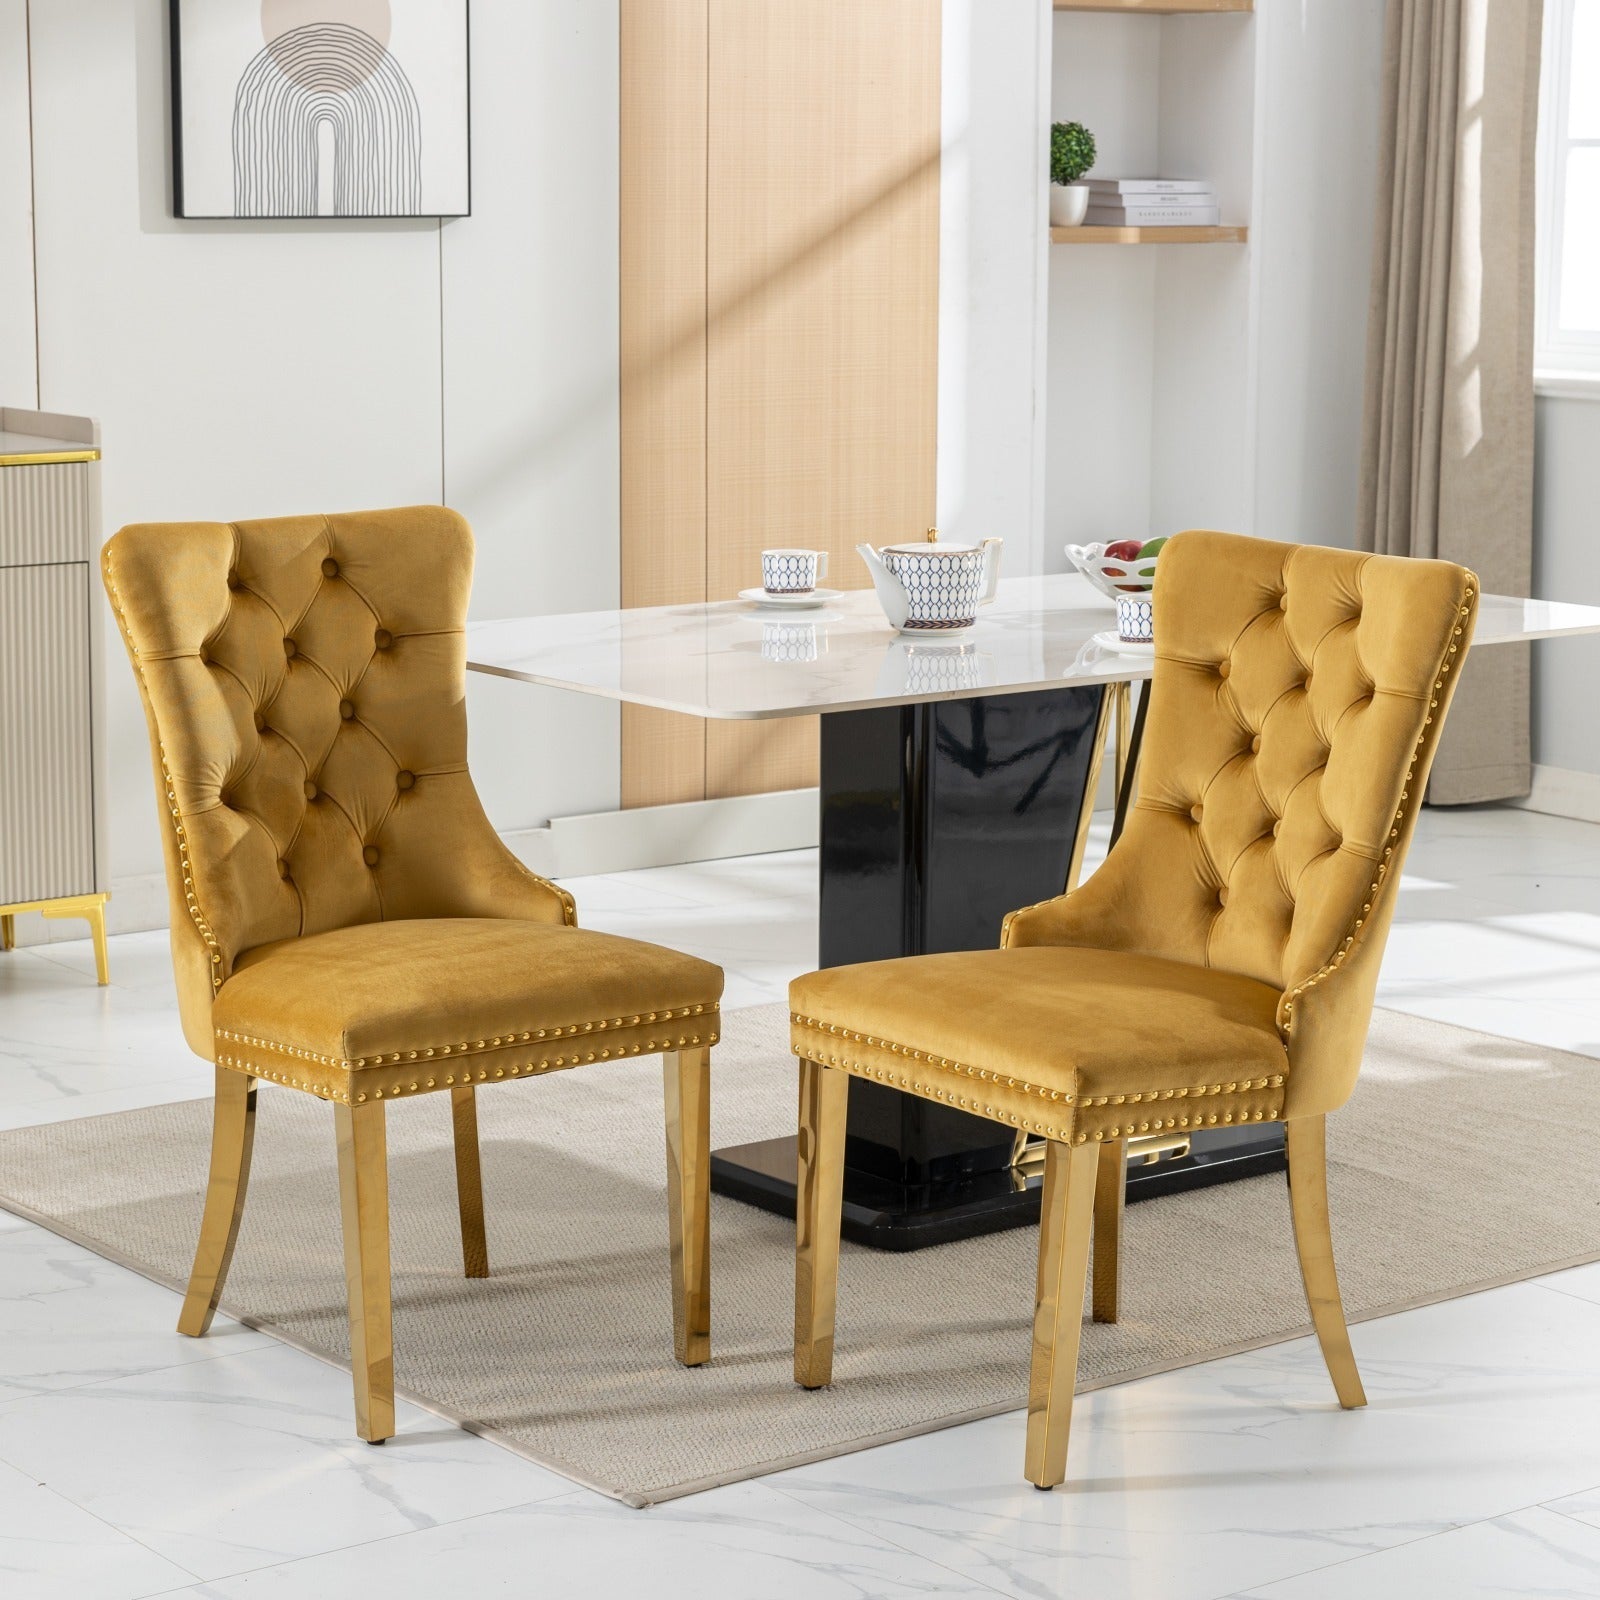 🆓🚛 High-End Tufted Solid Wood Contemporary Velvet Upholstered Dining Chair With Golden Stainless Steel Plating Legs, Nailhead Trim, Set of 2, Gold